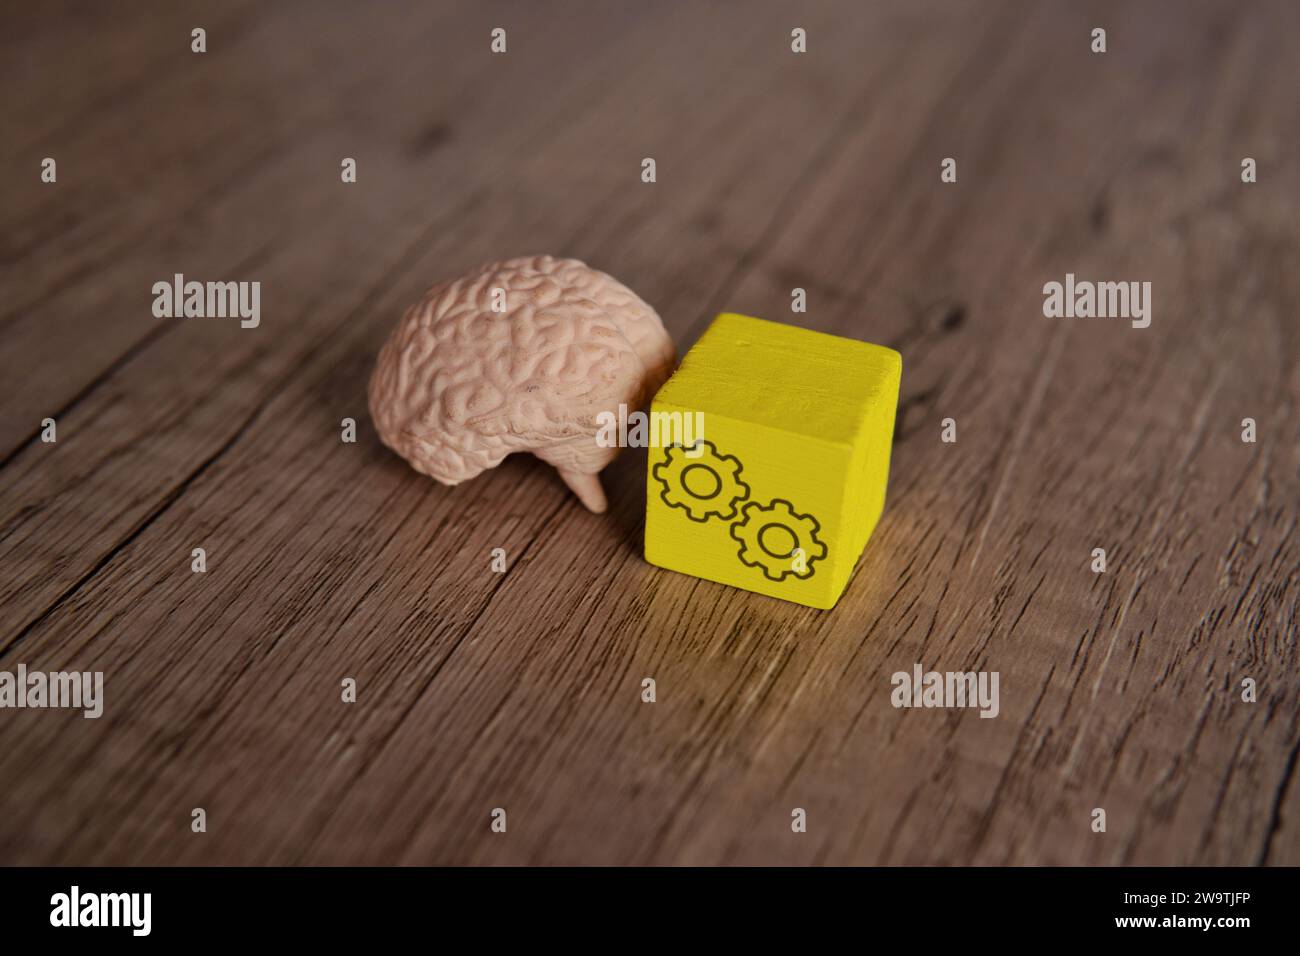 Human brain and wooden block with cogwheel icon. Cognitive thinking, brainstorming conceptual. Stock Photo